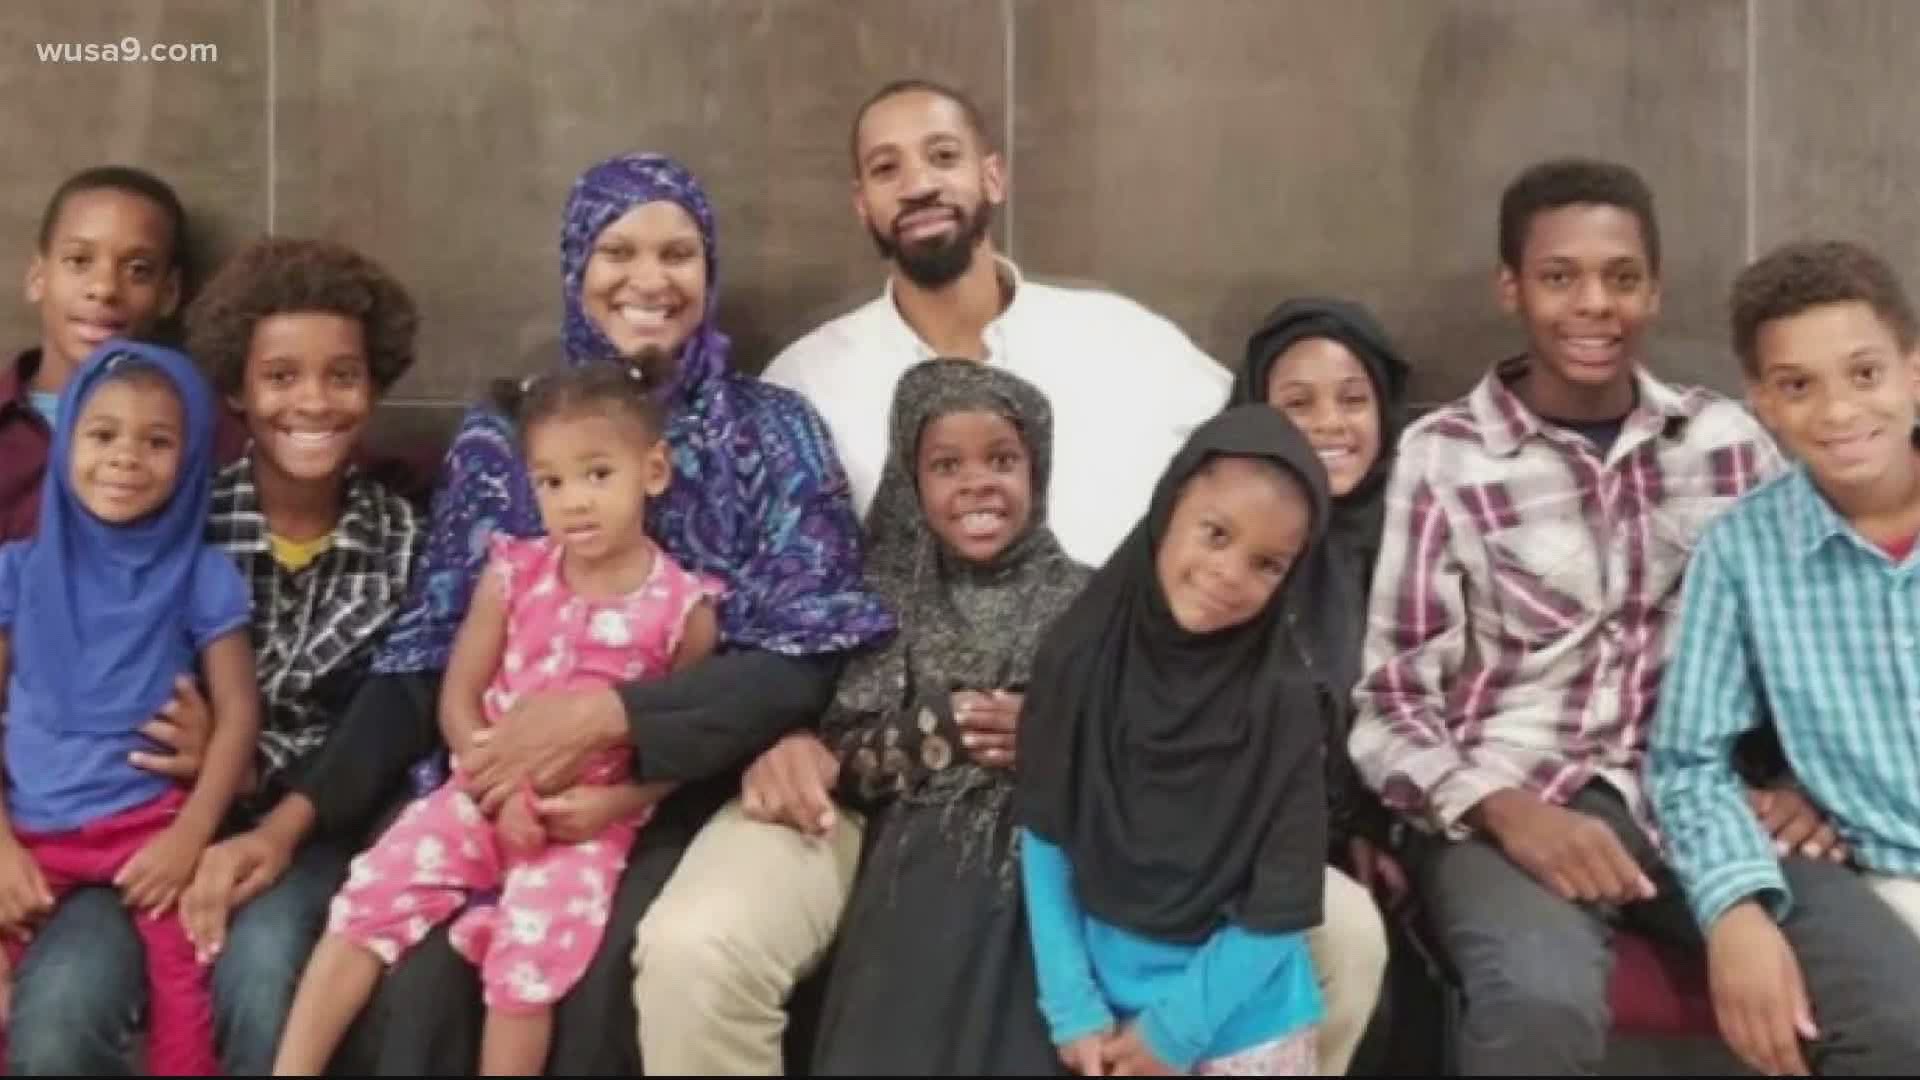 More than $820,000 has been raised for the family of a Muslim farmer injured in the crash.